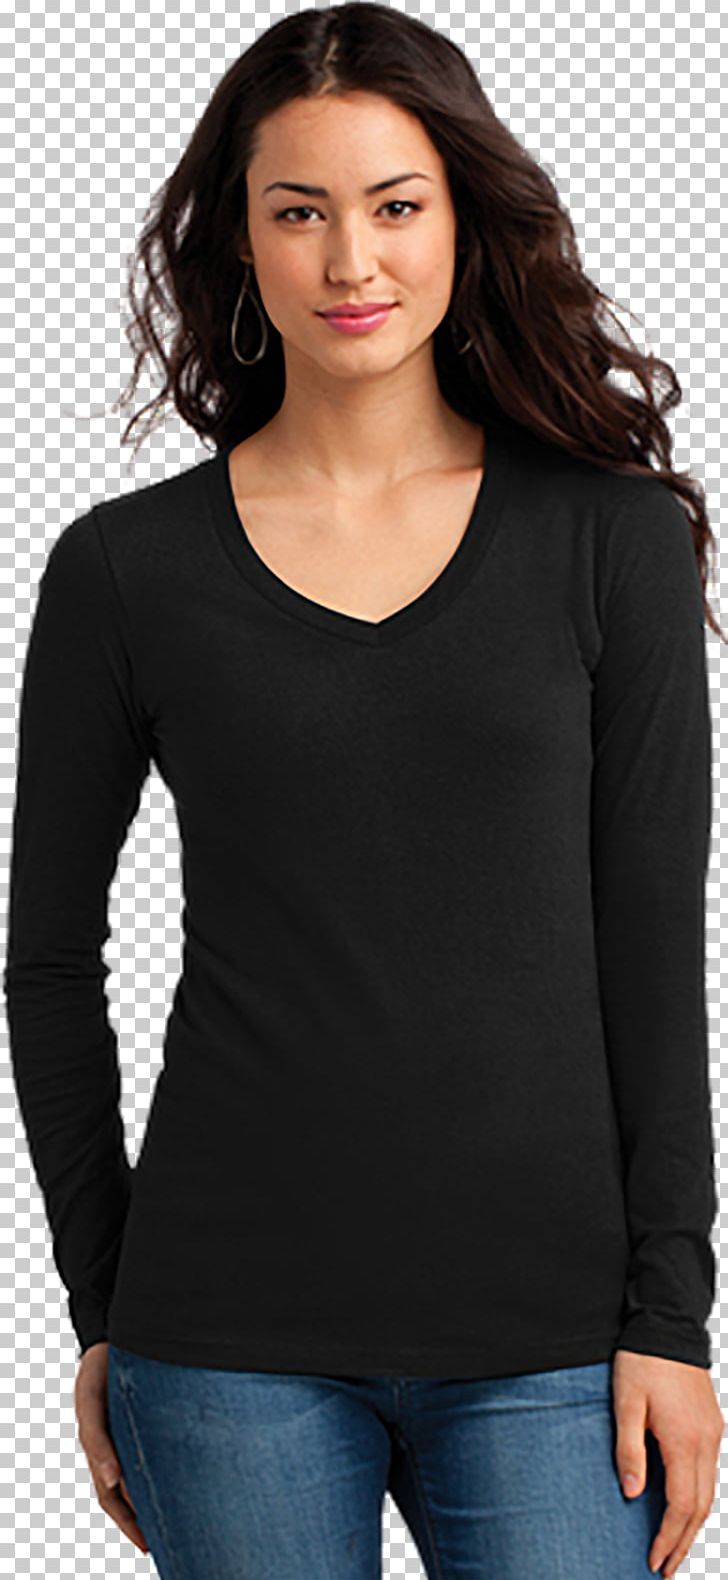 Long-sleeved T-shirt Neckline PNG, Clipart, Black, Clothing, Clothing Sizes, Collar, Concert Tshirt Free PNG Download